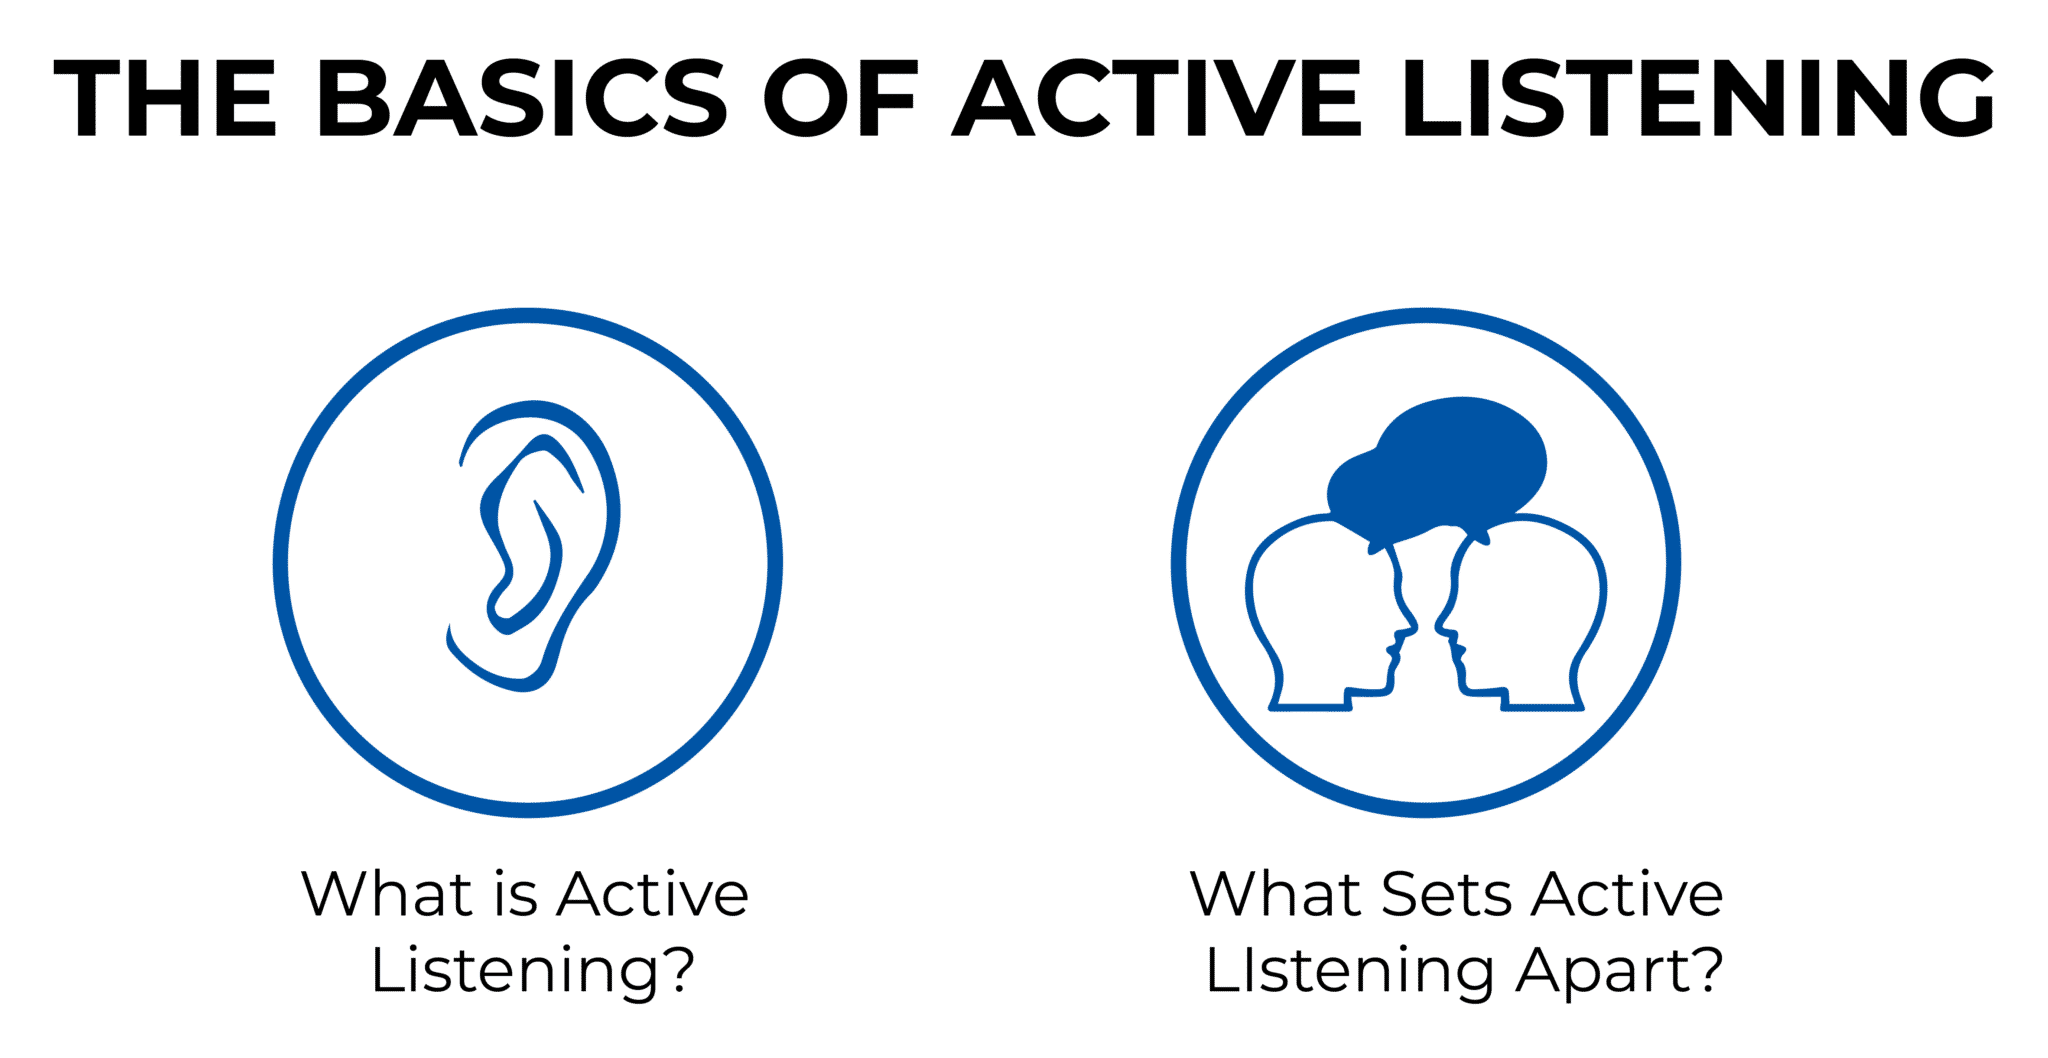 THE BASICS OF ACTIVE LISTENING